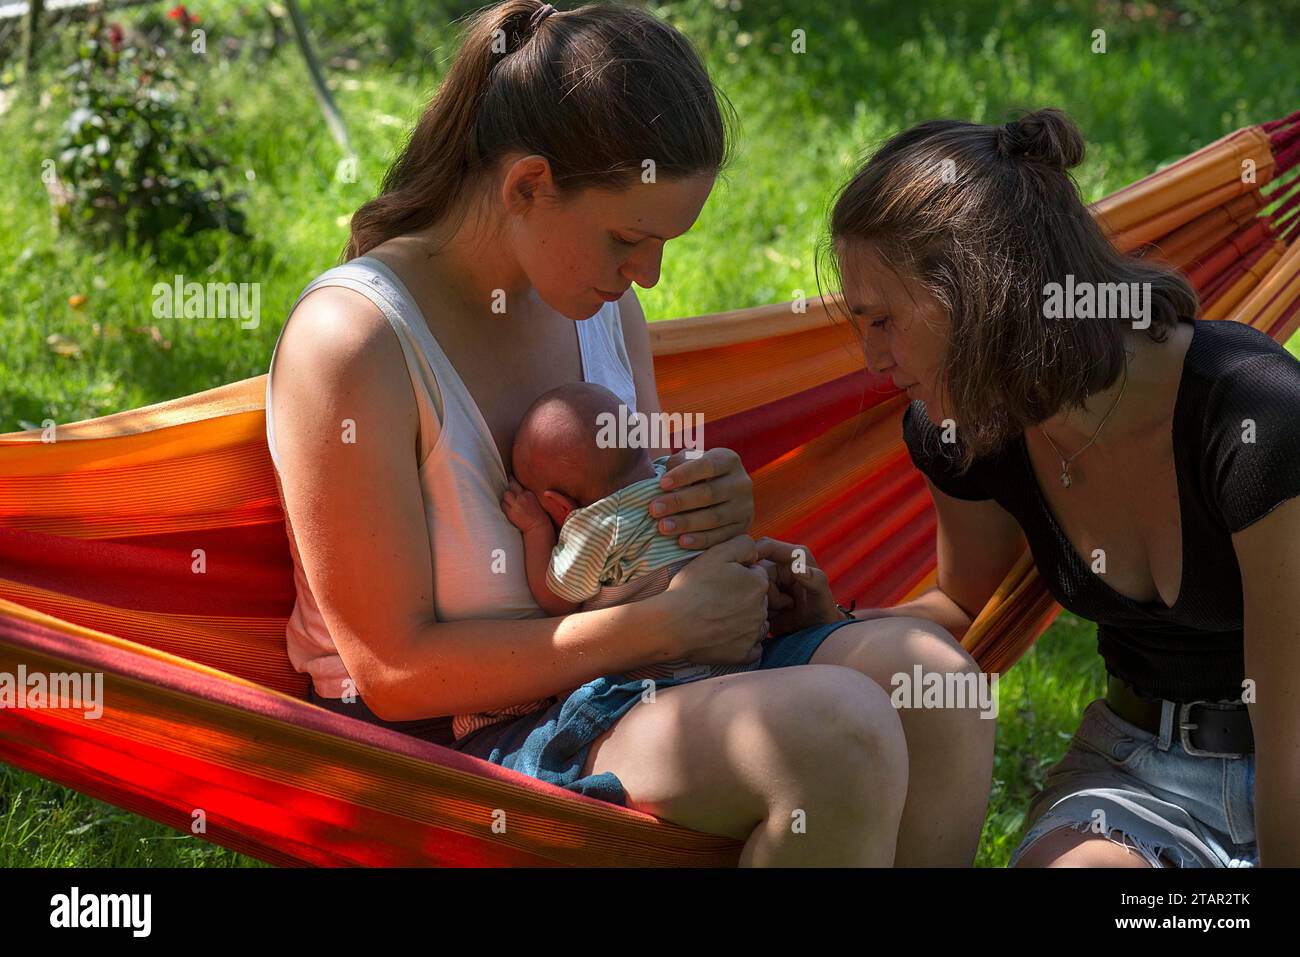 Young mother with baby in a hammock in the garden, sister on the right, Mecklenburg-Vorpommern, Germany Stock Photo